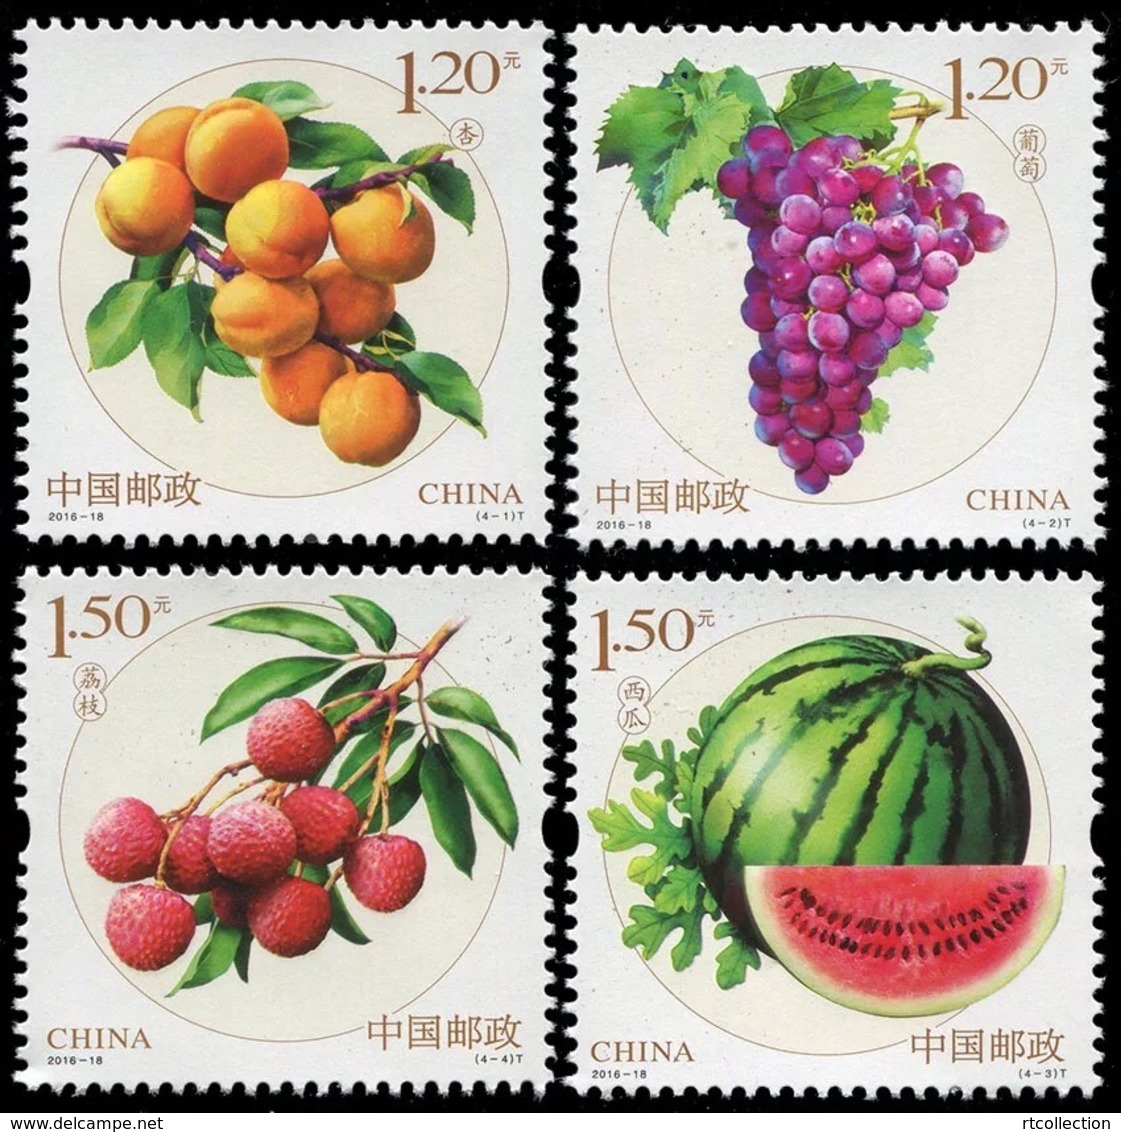 China 2016 2016-18 Special Stamps Fruits II Grapes Apricots Water Melon Lychees Series No. 2 Plants Food Nature V4 MNH - Alimentation